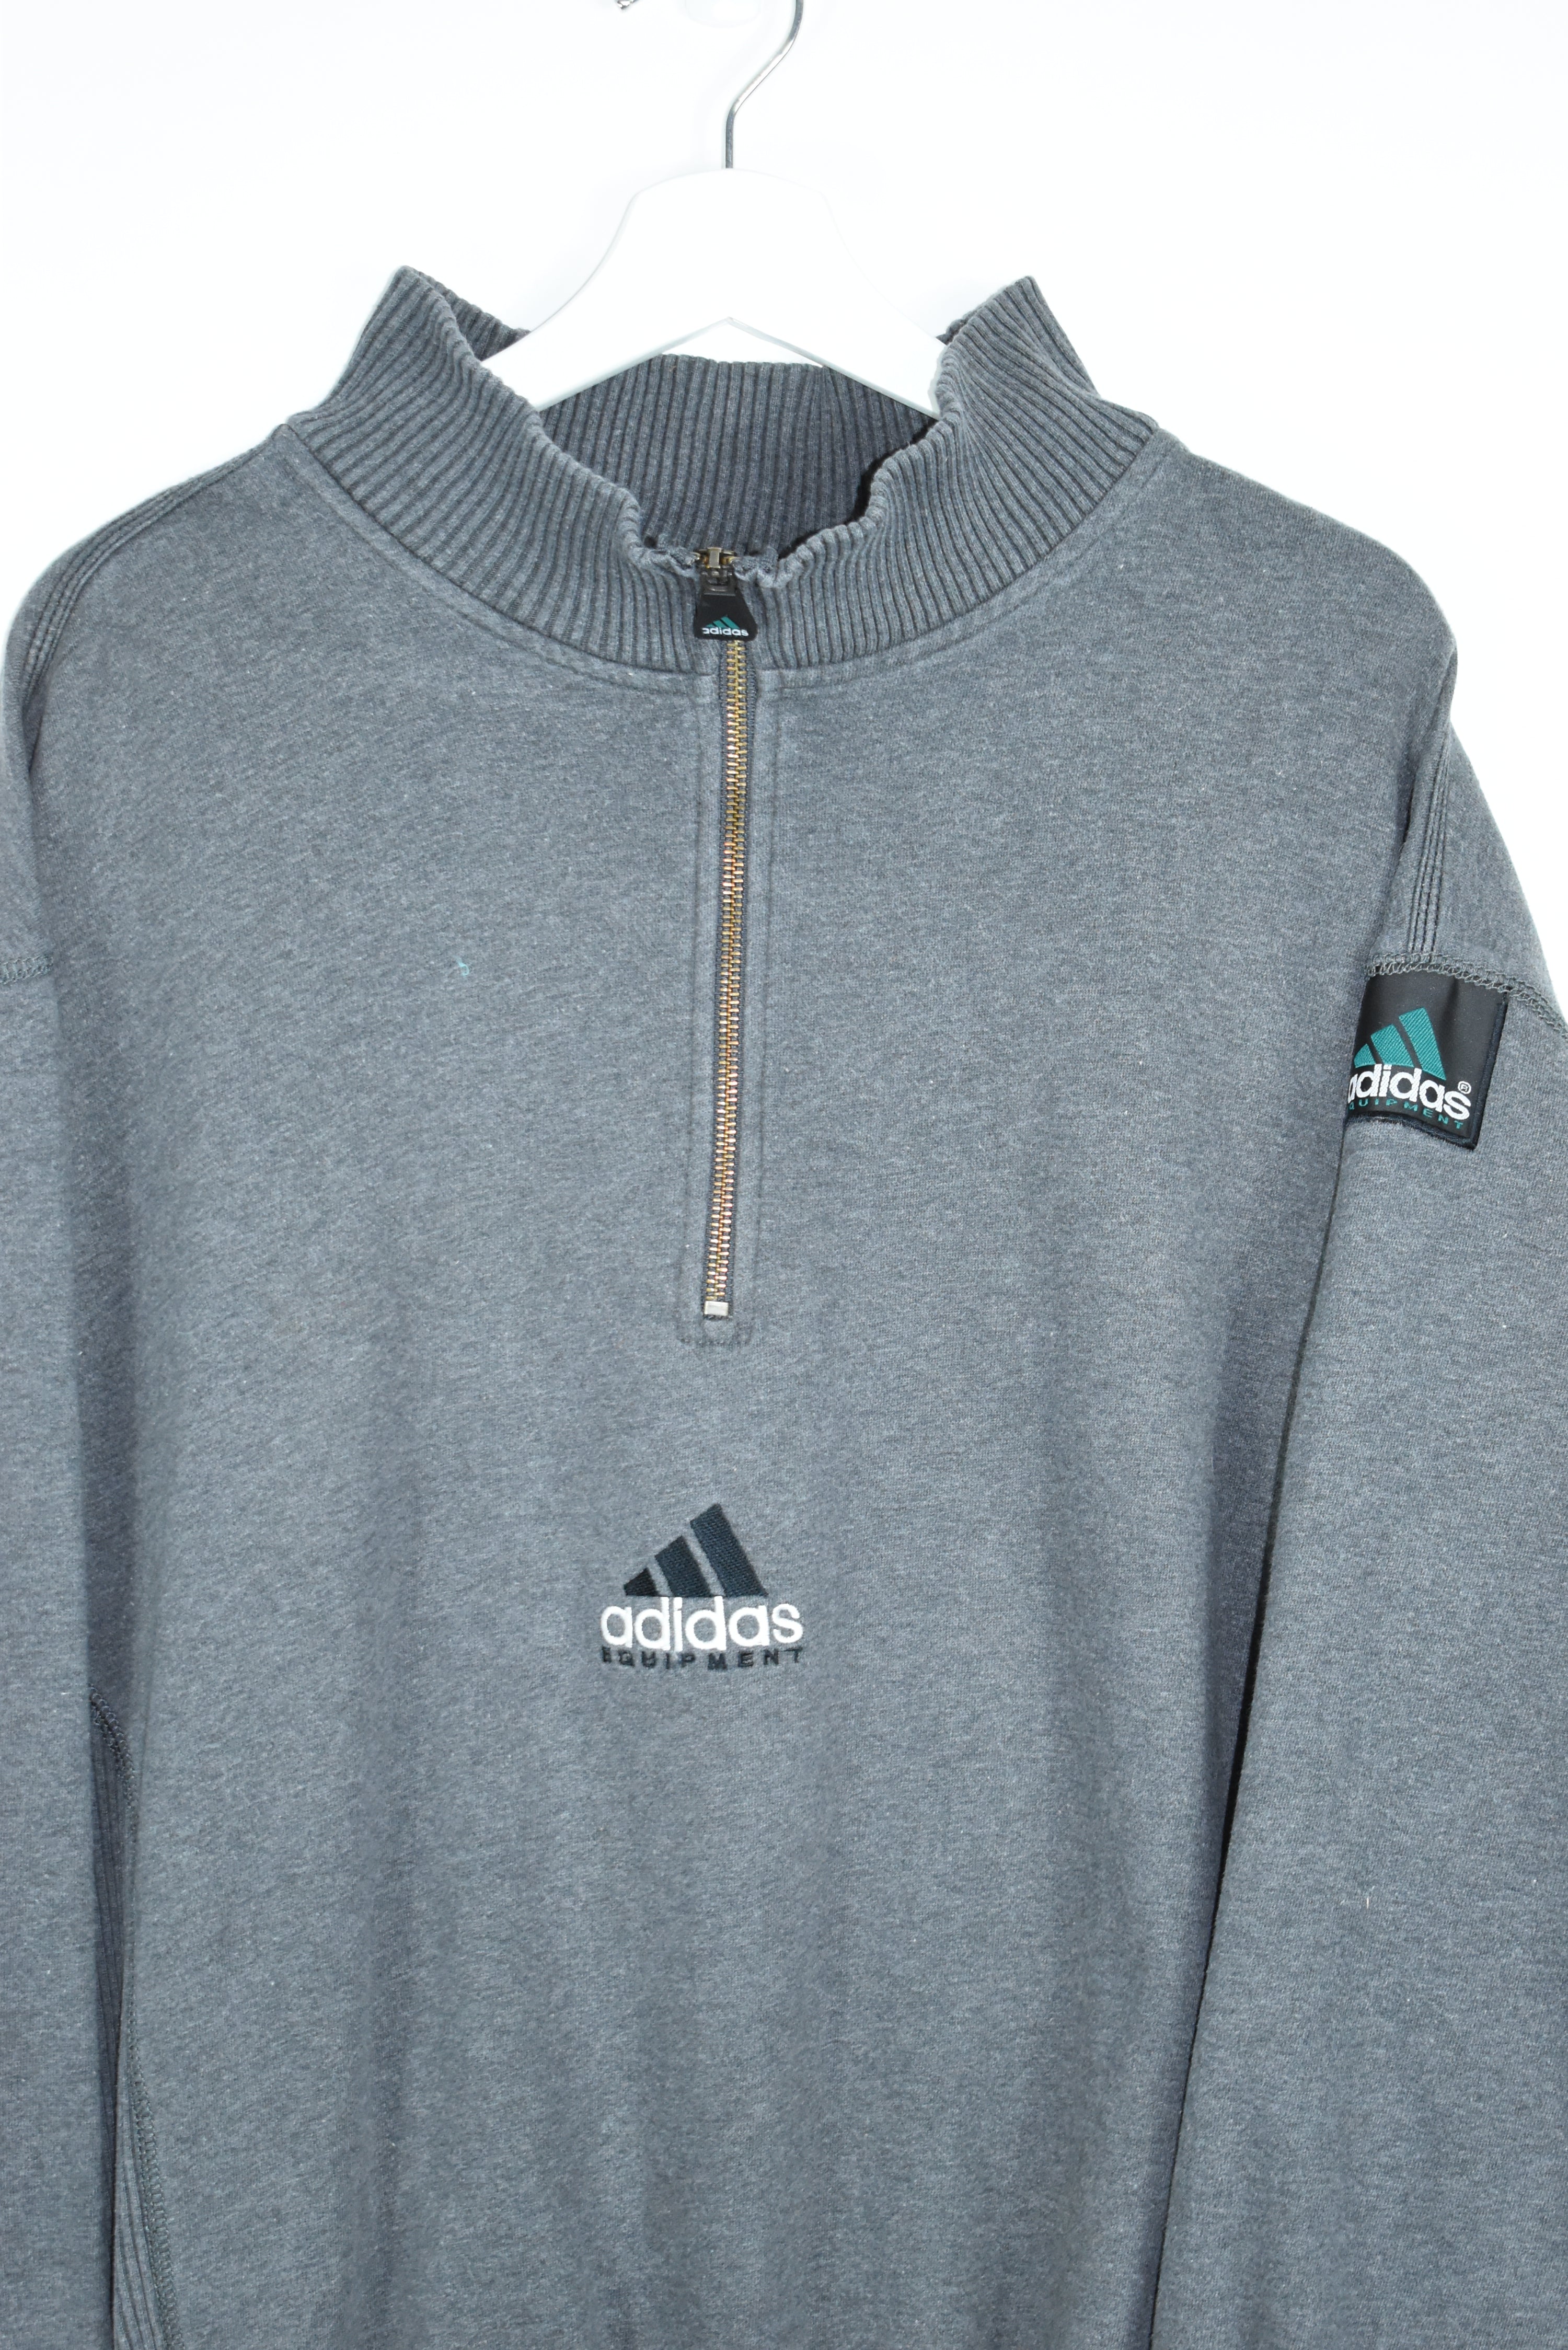 Vintage RARE Adidas Equipment Embroidery 1/4 Zip LARGE (Baggy)